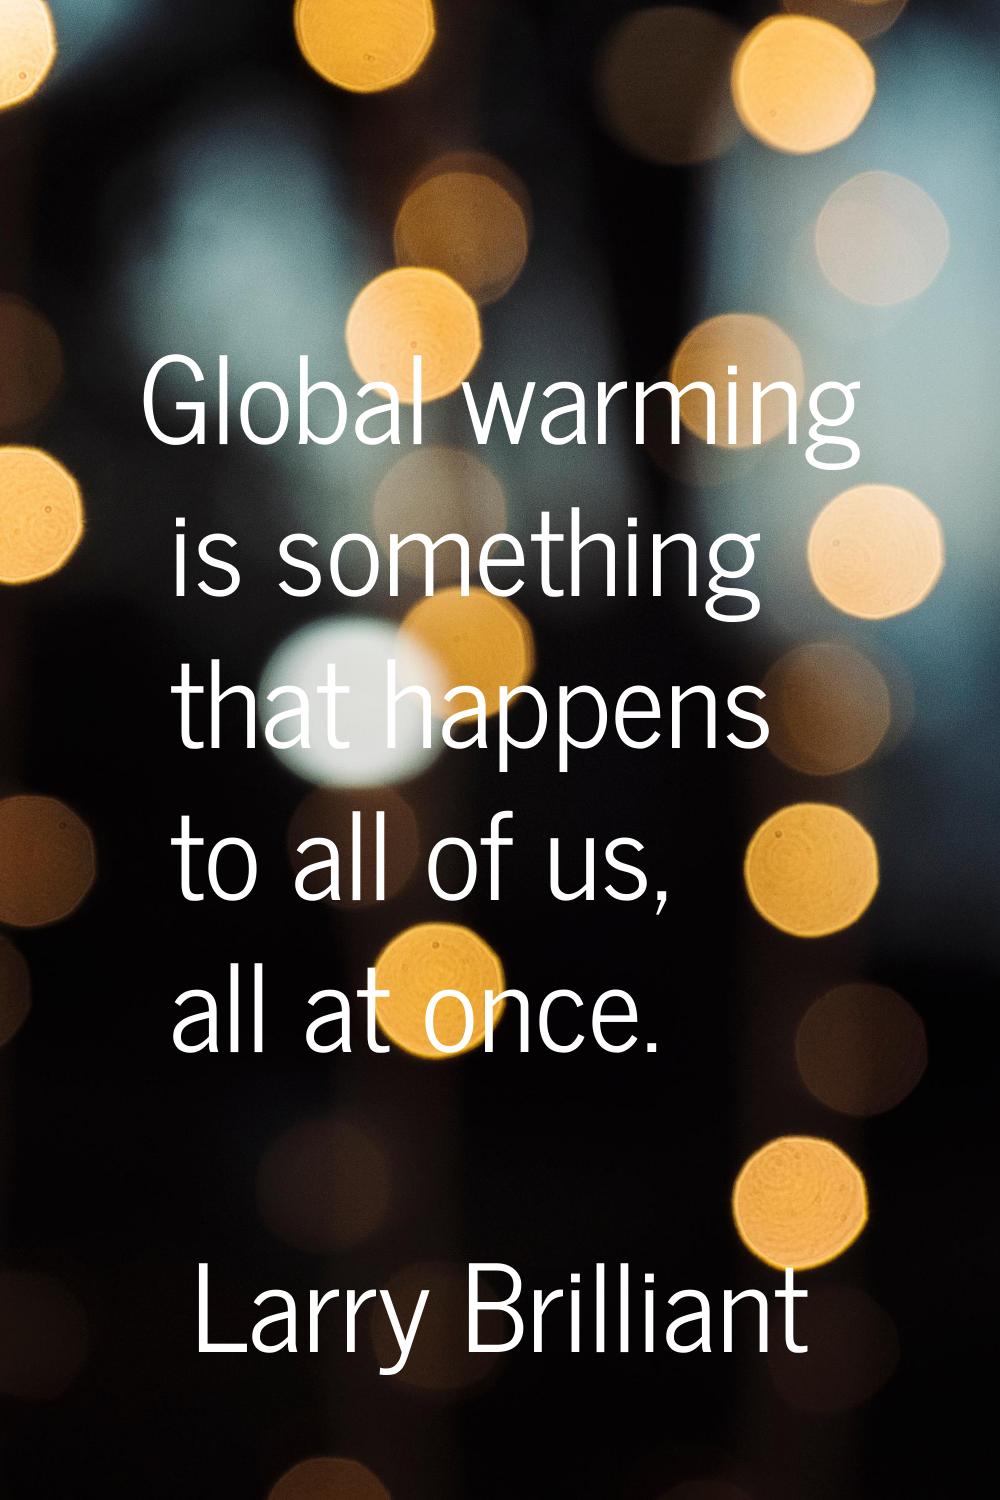 Global warming is something that happens to all of us, all at once.